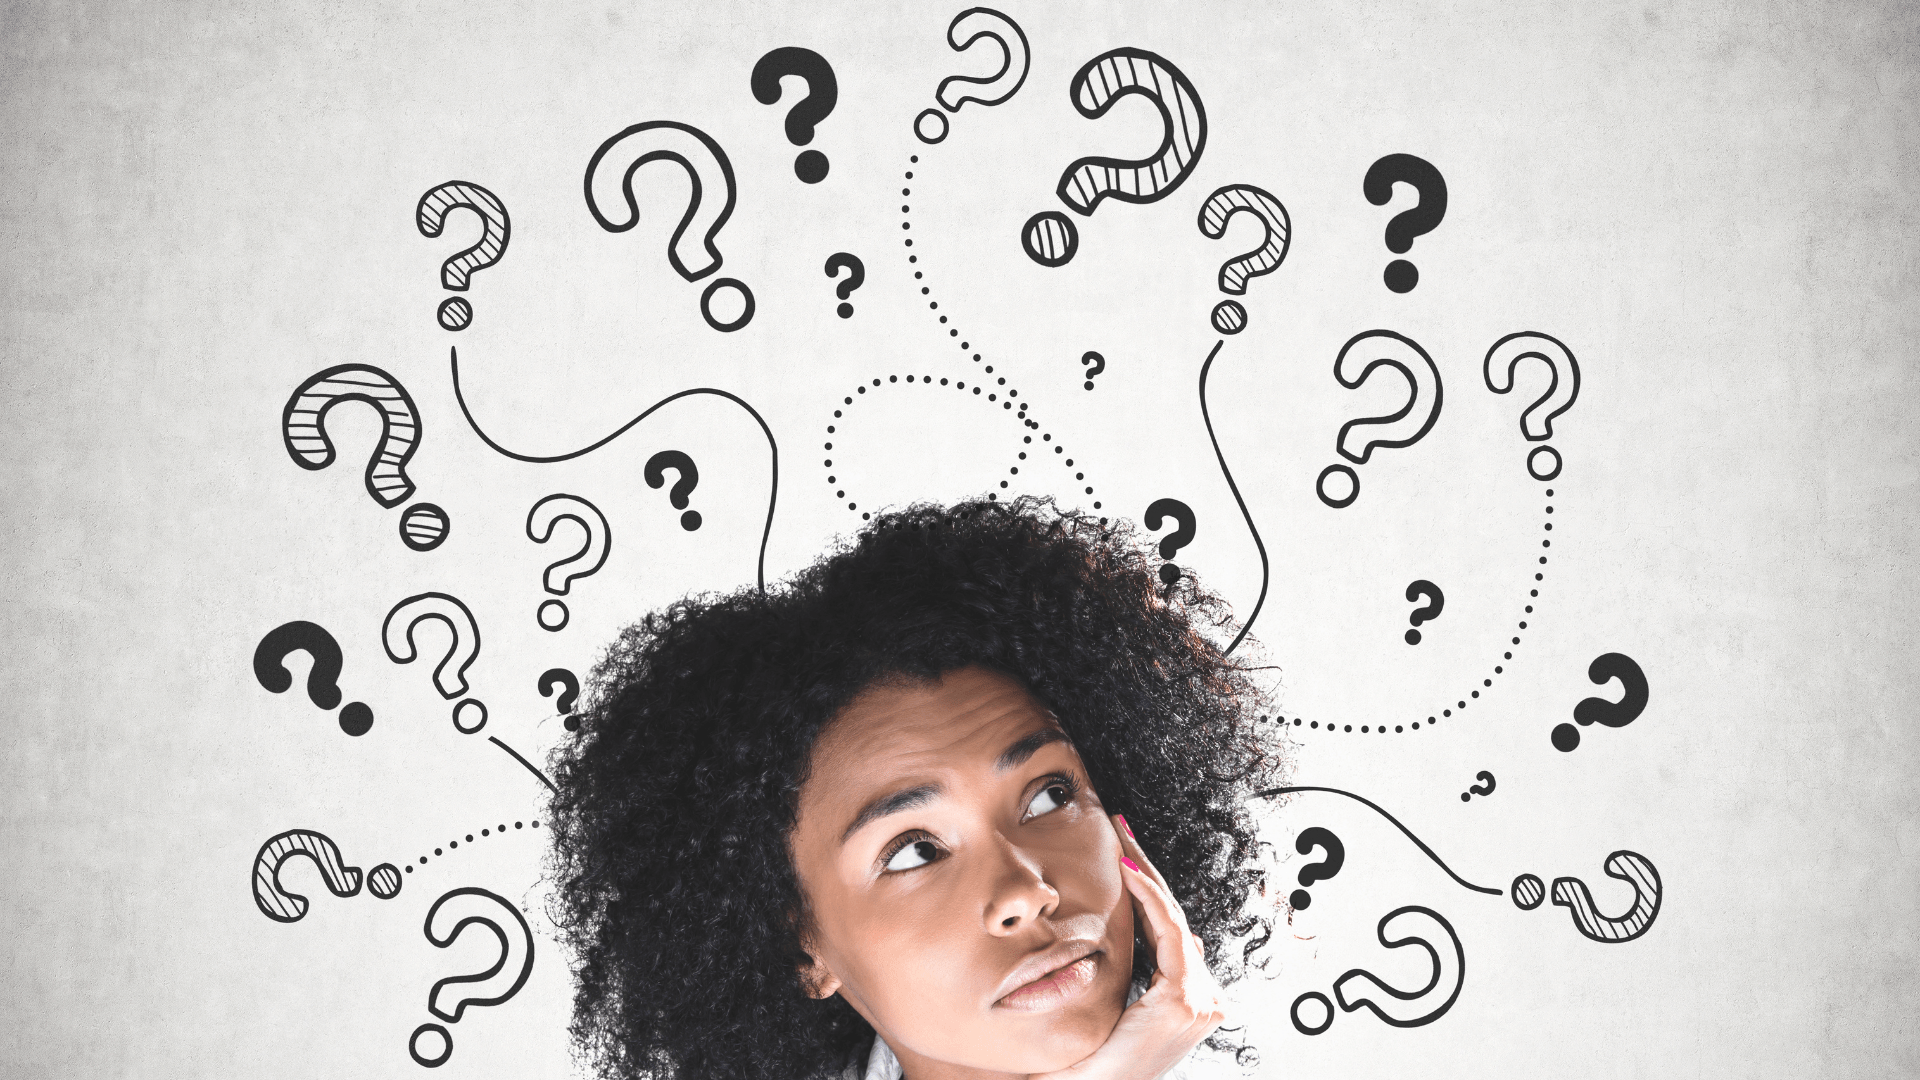 woman looking up questioning her thoughts with multiple question marks around her head